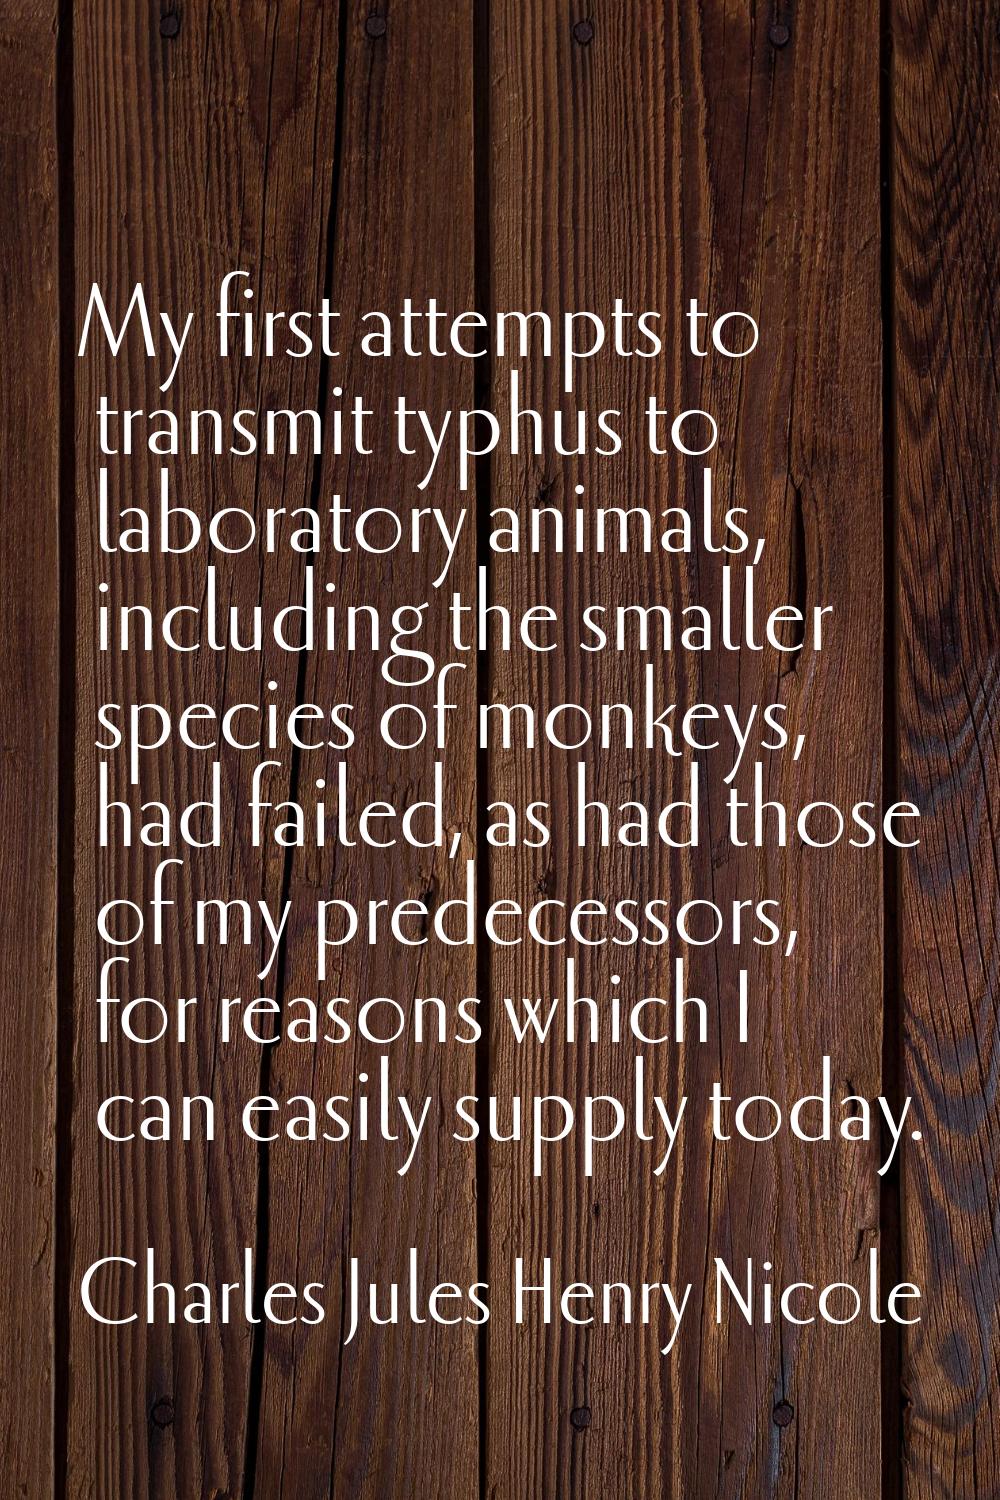 My first attempts to transmit typhus to laboratory animals, including the smaller species of monkey